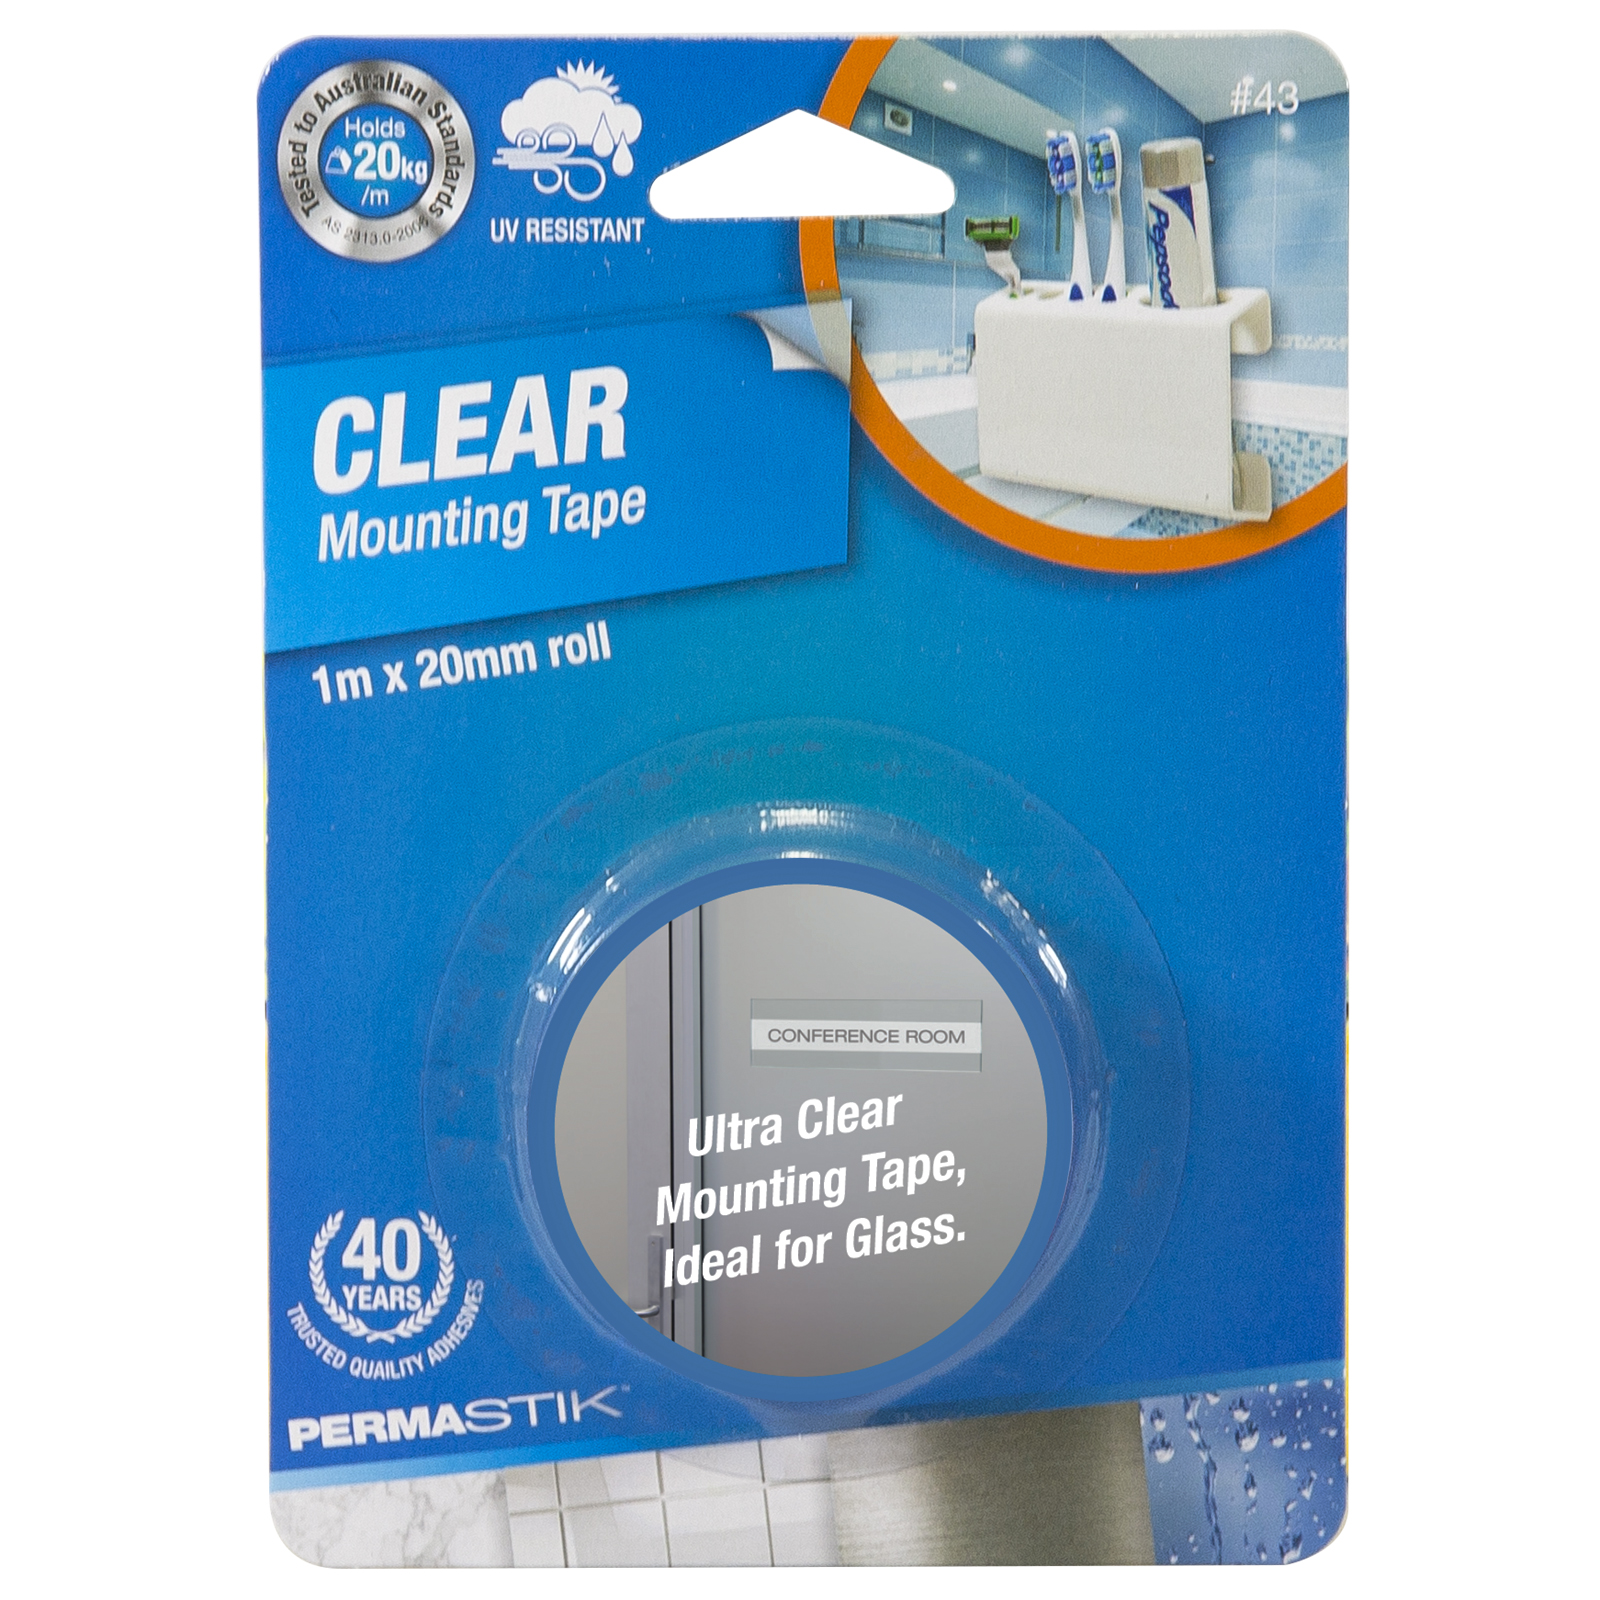 Permastik 1m x 20mm Clear Mounting Tape Roll